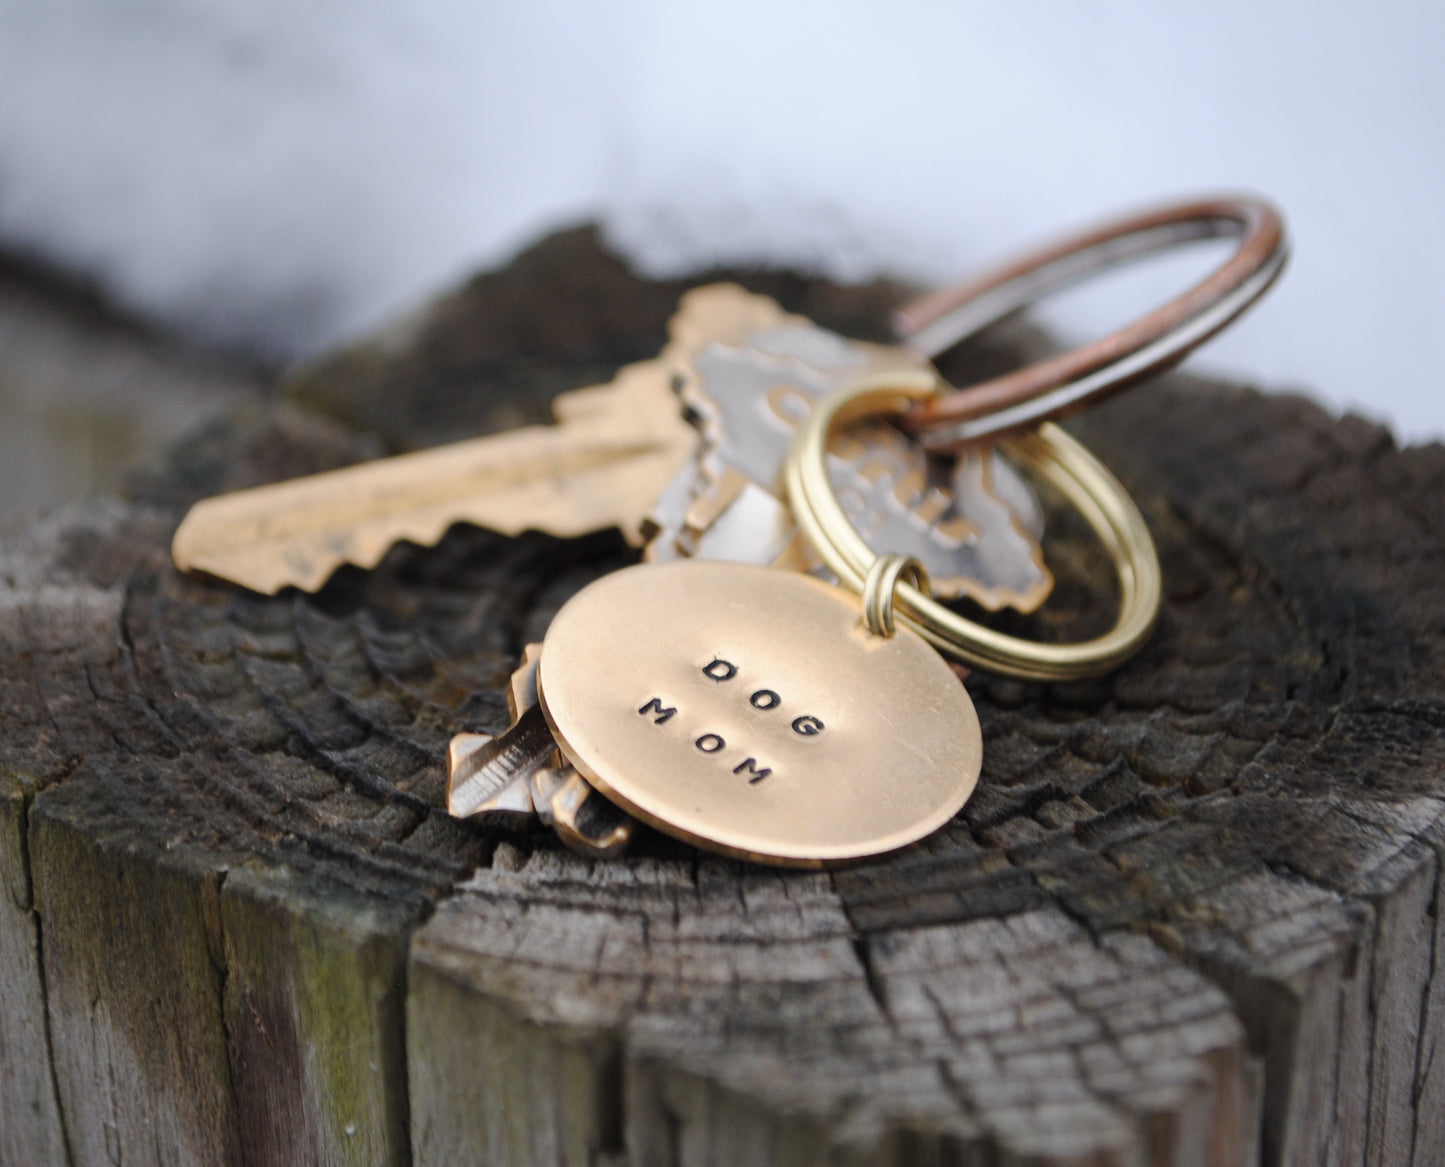 Dog Mom Keychain - Dog Mom Gift - Gift for Her - Pet Parents Gift - Fur Mom - Dog Mom Keytag - Gift for Couples - Cat Mom Gift - Unique Gift